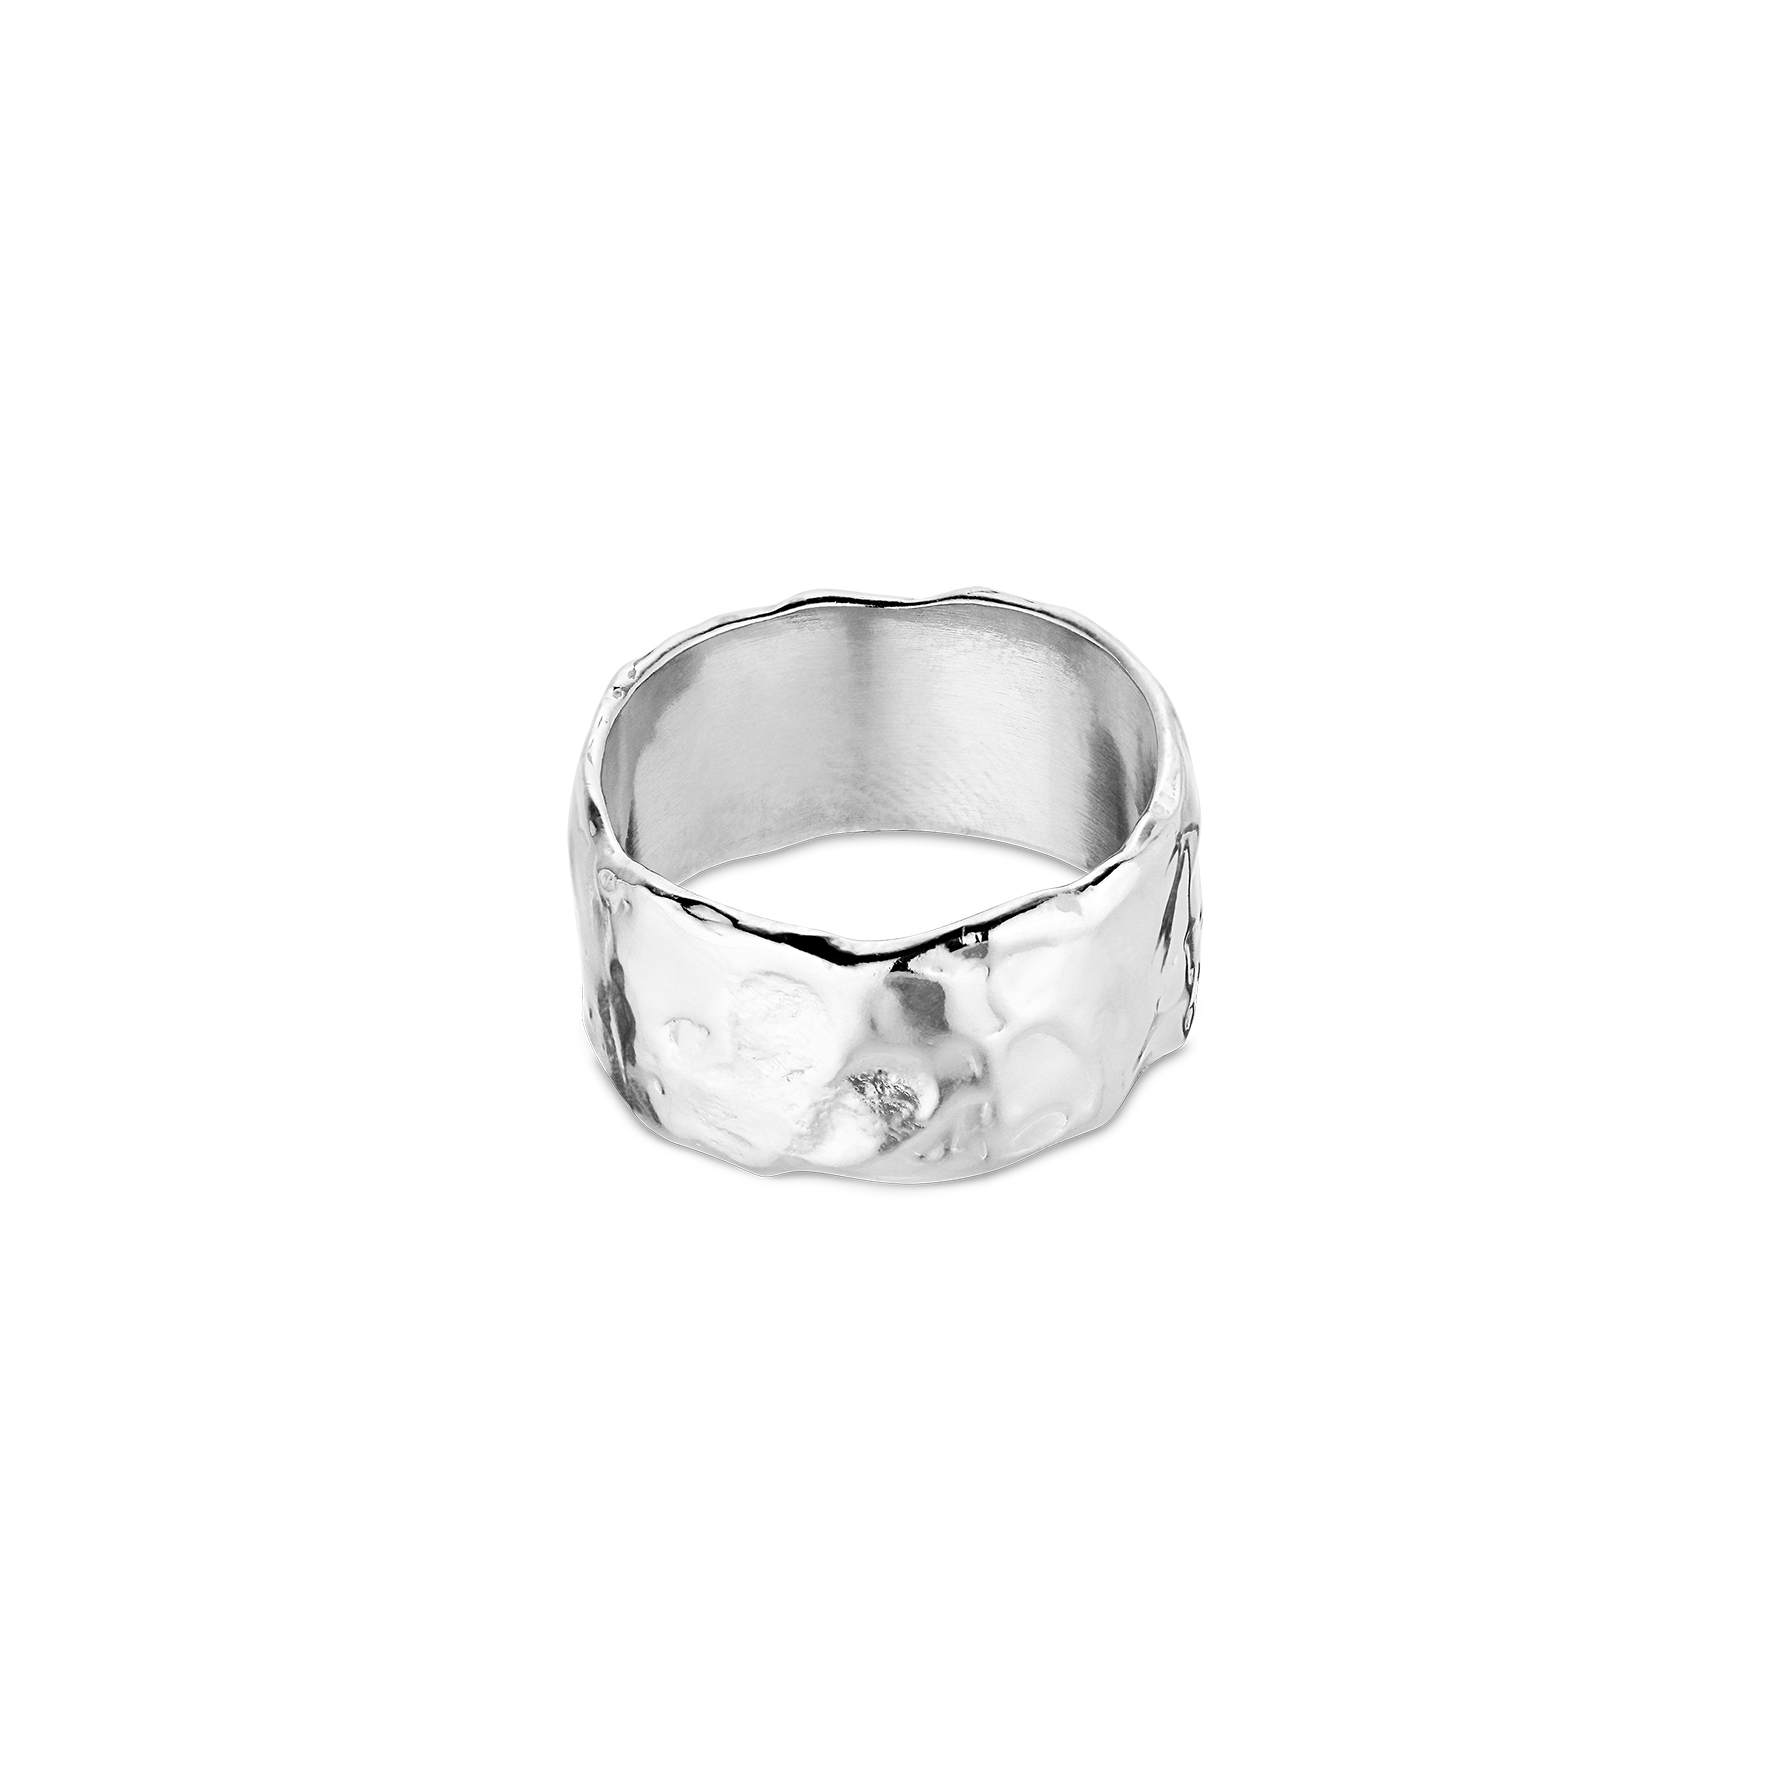 Bruised Heart Ring from Jane Kønig in Silver Sterling 925